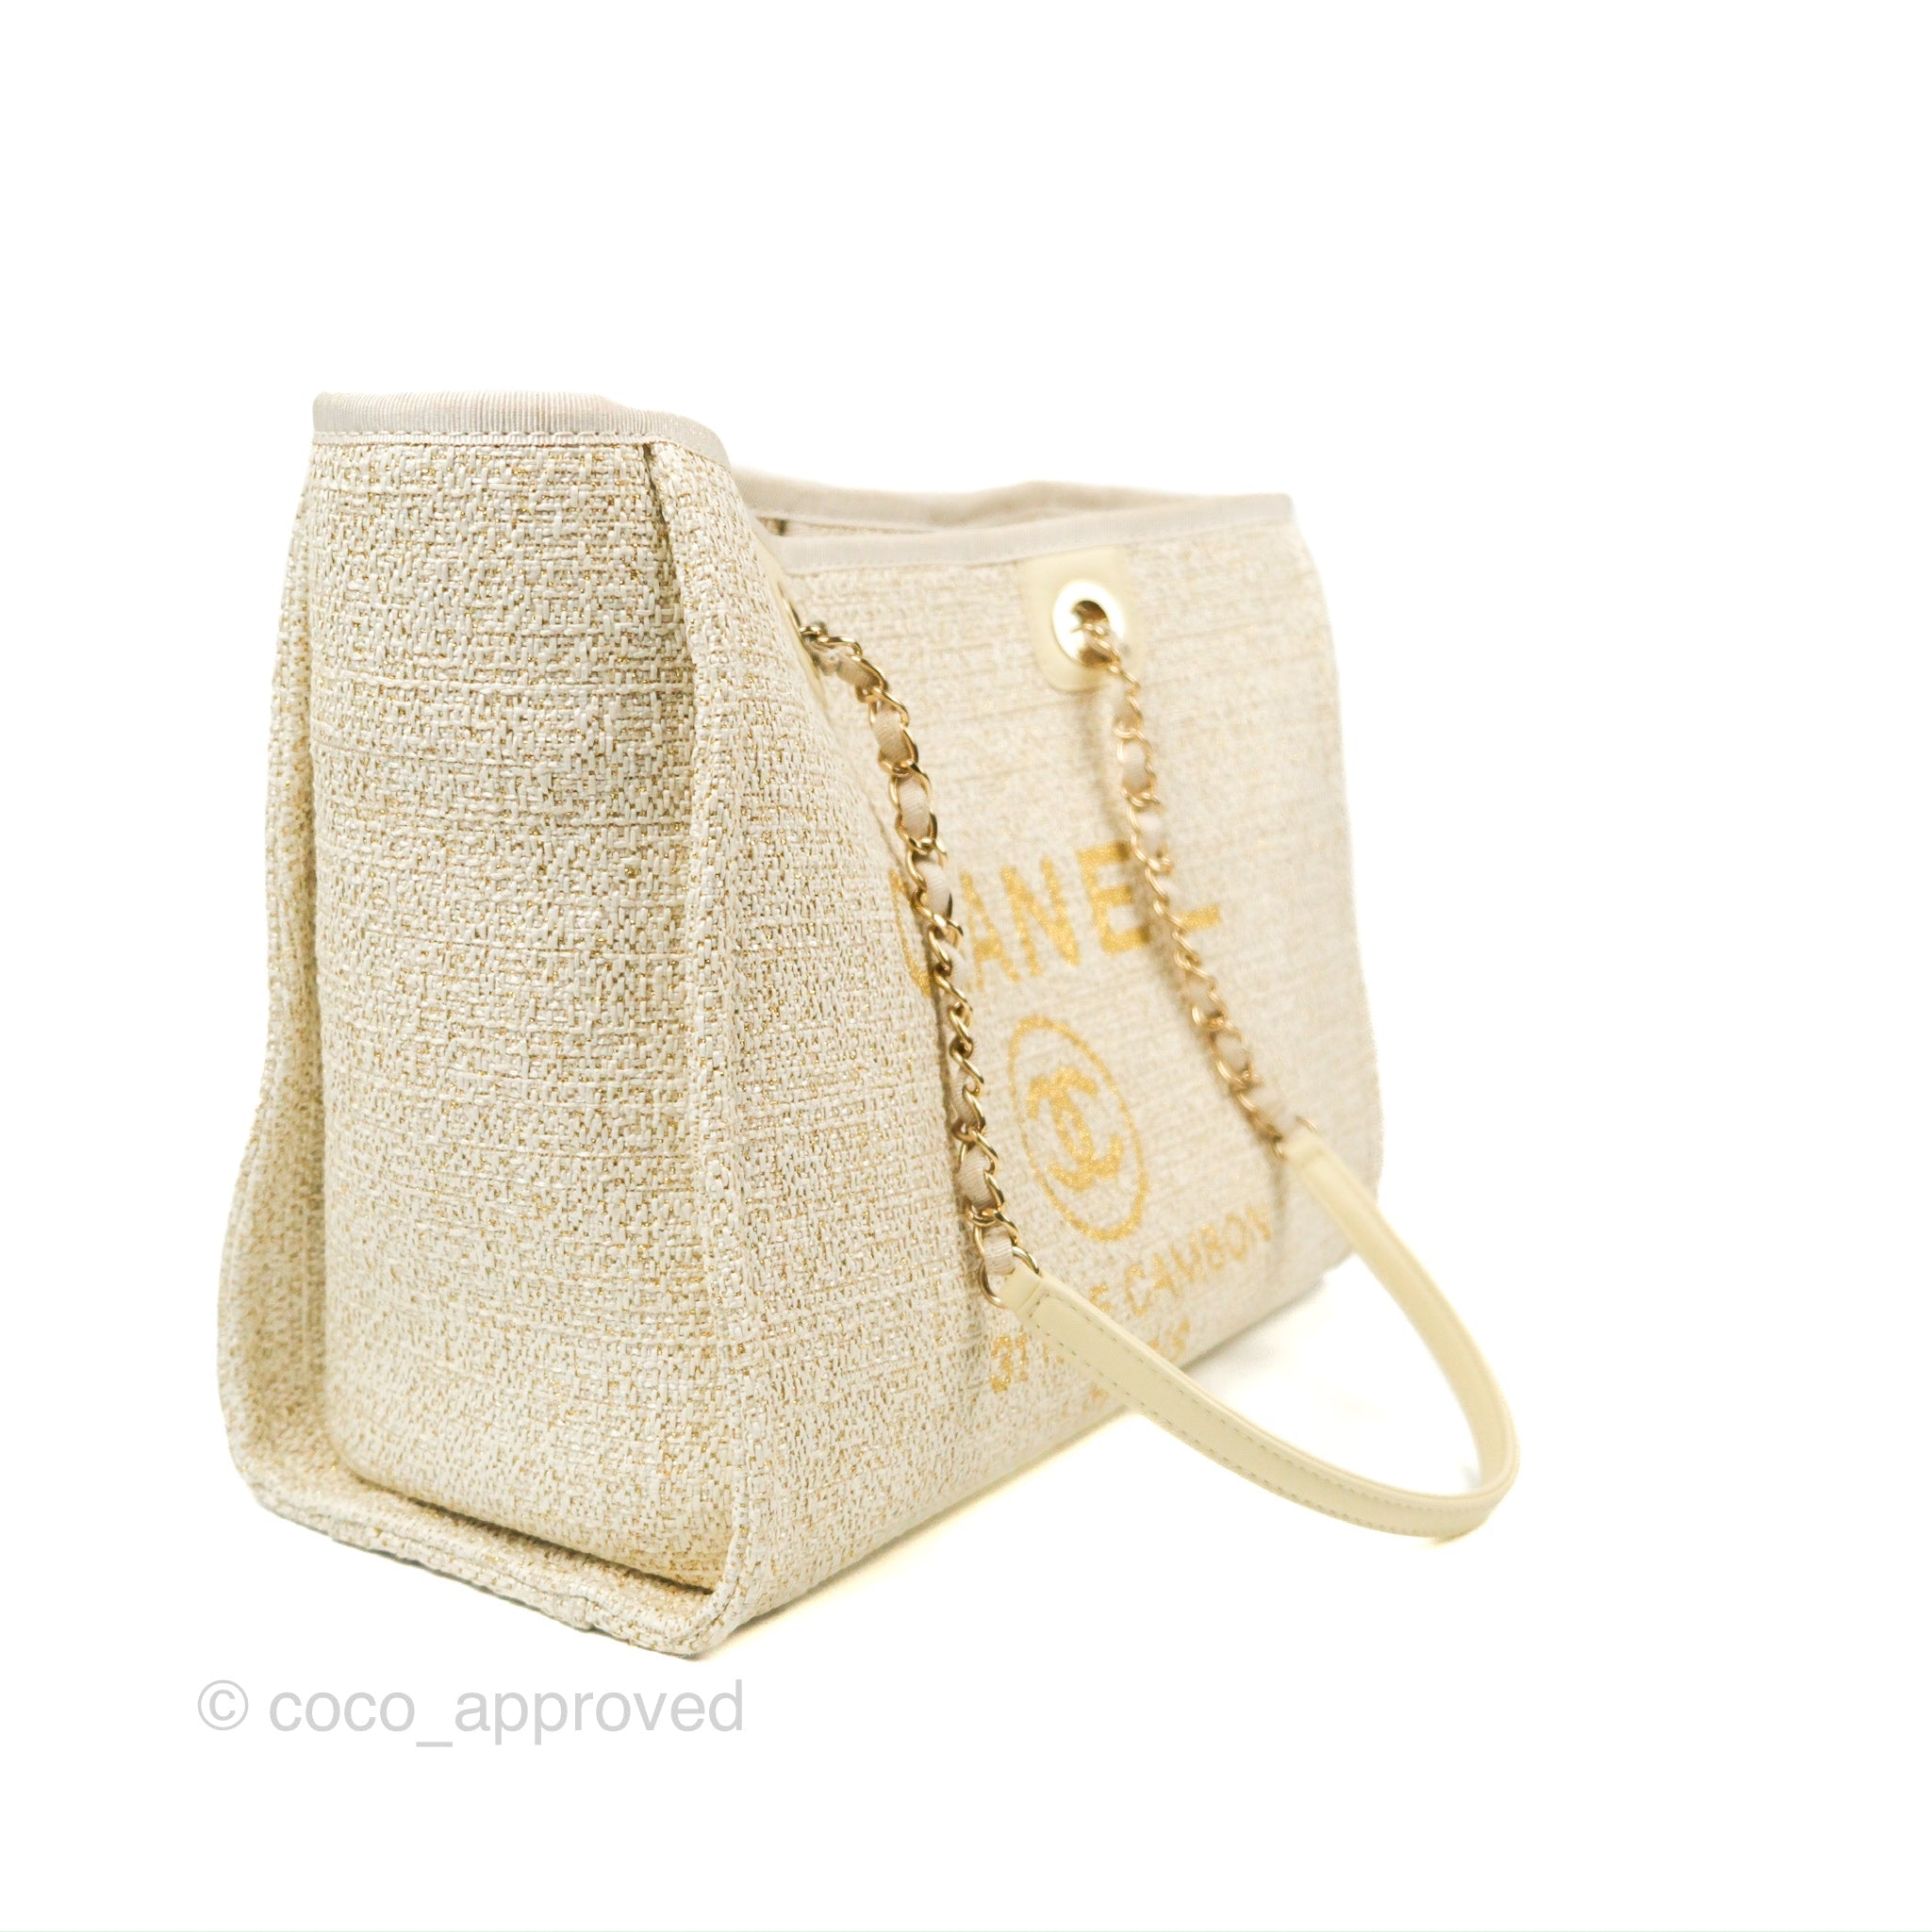 Chanel Deauville Medium, Beige and Gold Tweed with Gold Hardware, Preowned  No Dustbag WA001 - Julia Rose Boston